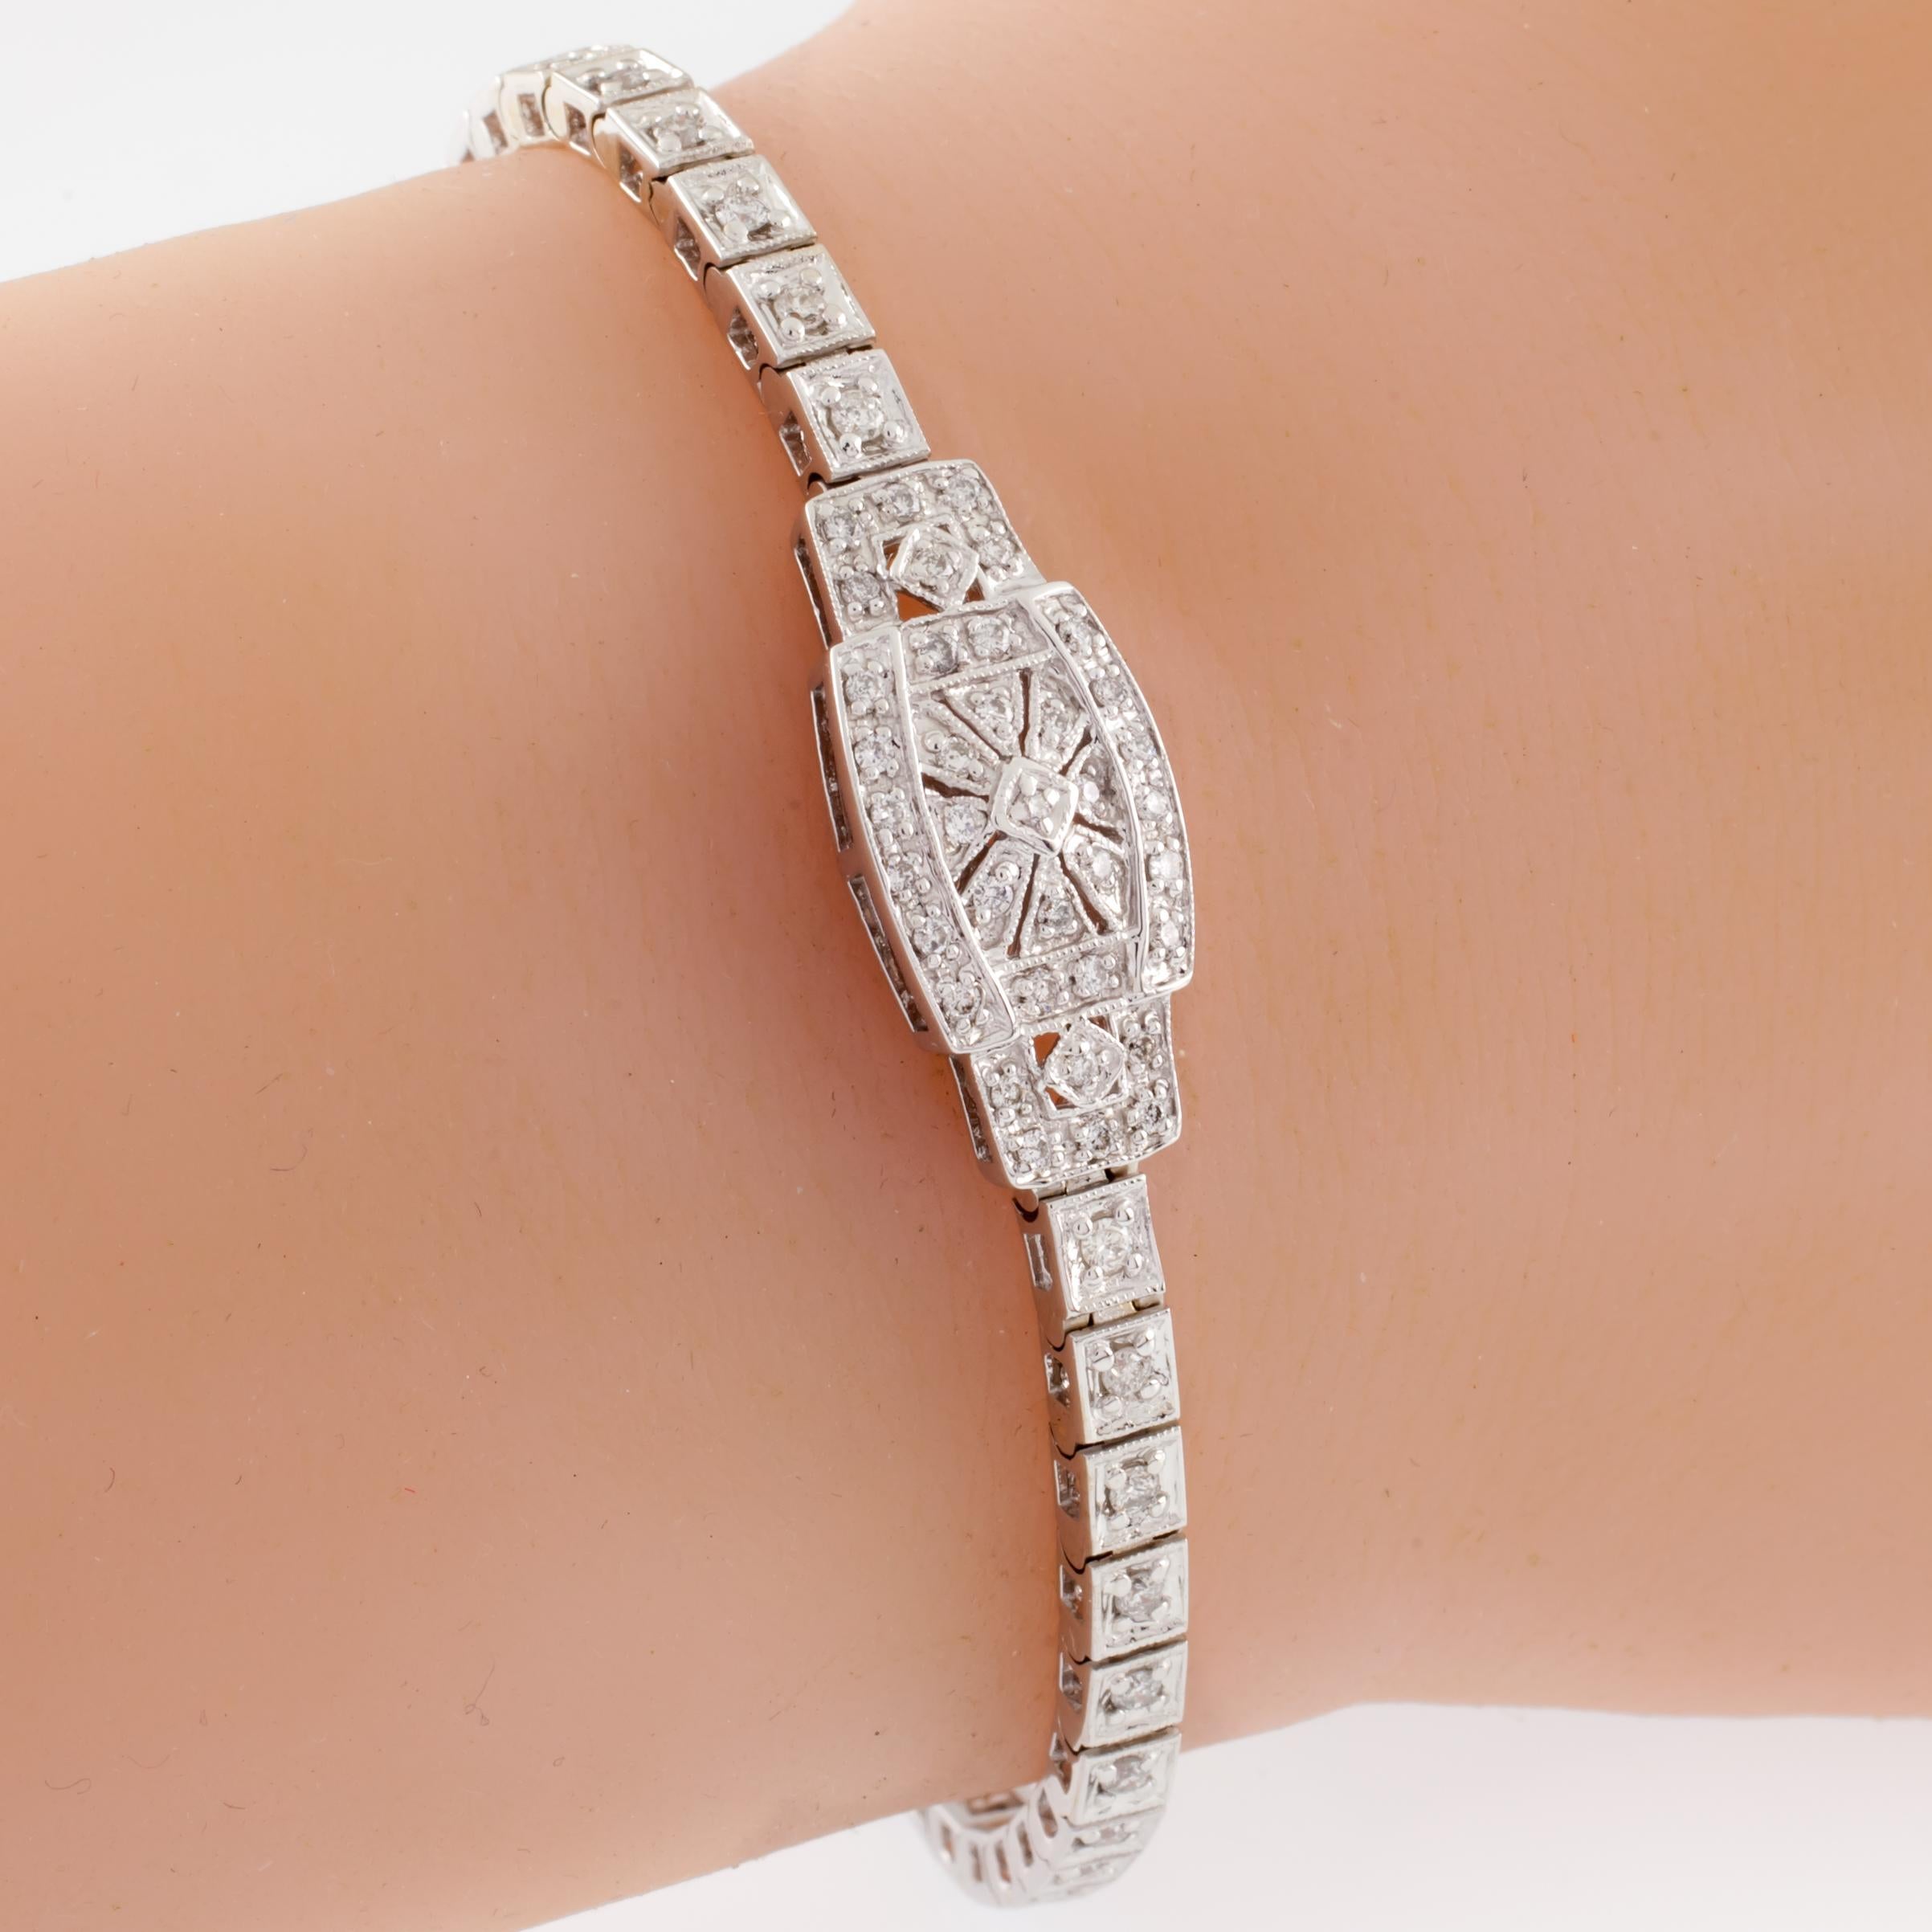 Gorgeous Art Deco-inspired bracelet
Features Pave-Set Round Diamond on Band
Round Diamonds Set in Beautiful Sunburst Pattern on Plaque
Total Diamond Weight = 1.00 ct
Average Color = G - H
Average Clarity = SI1 - VS
Width of Band = 3 mm
Width of